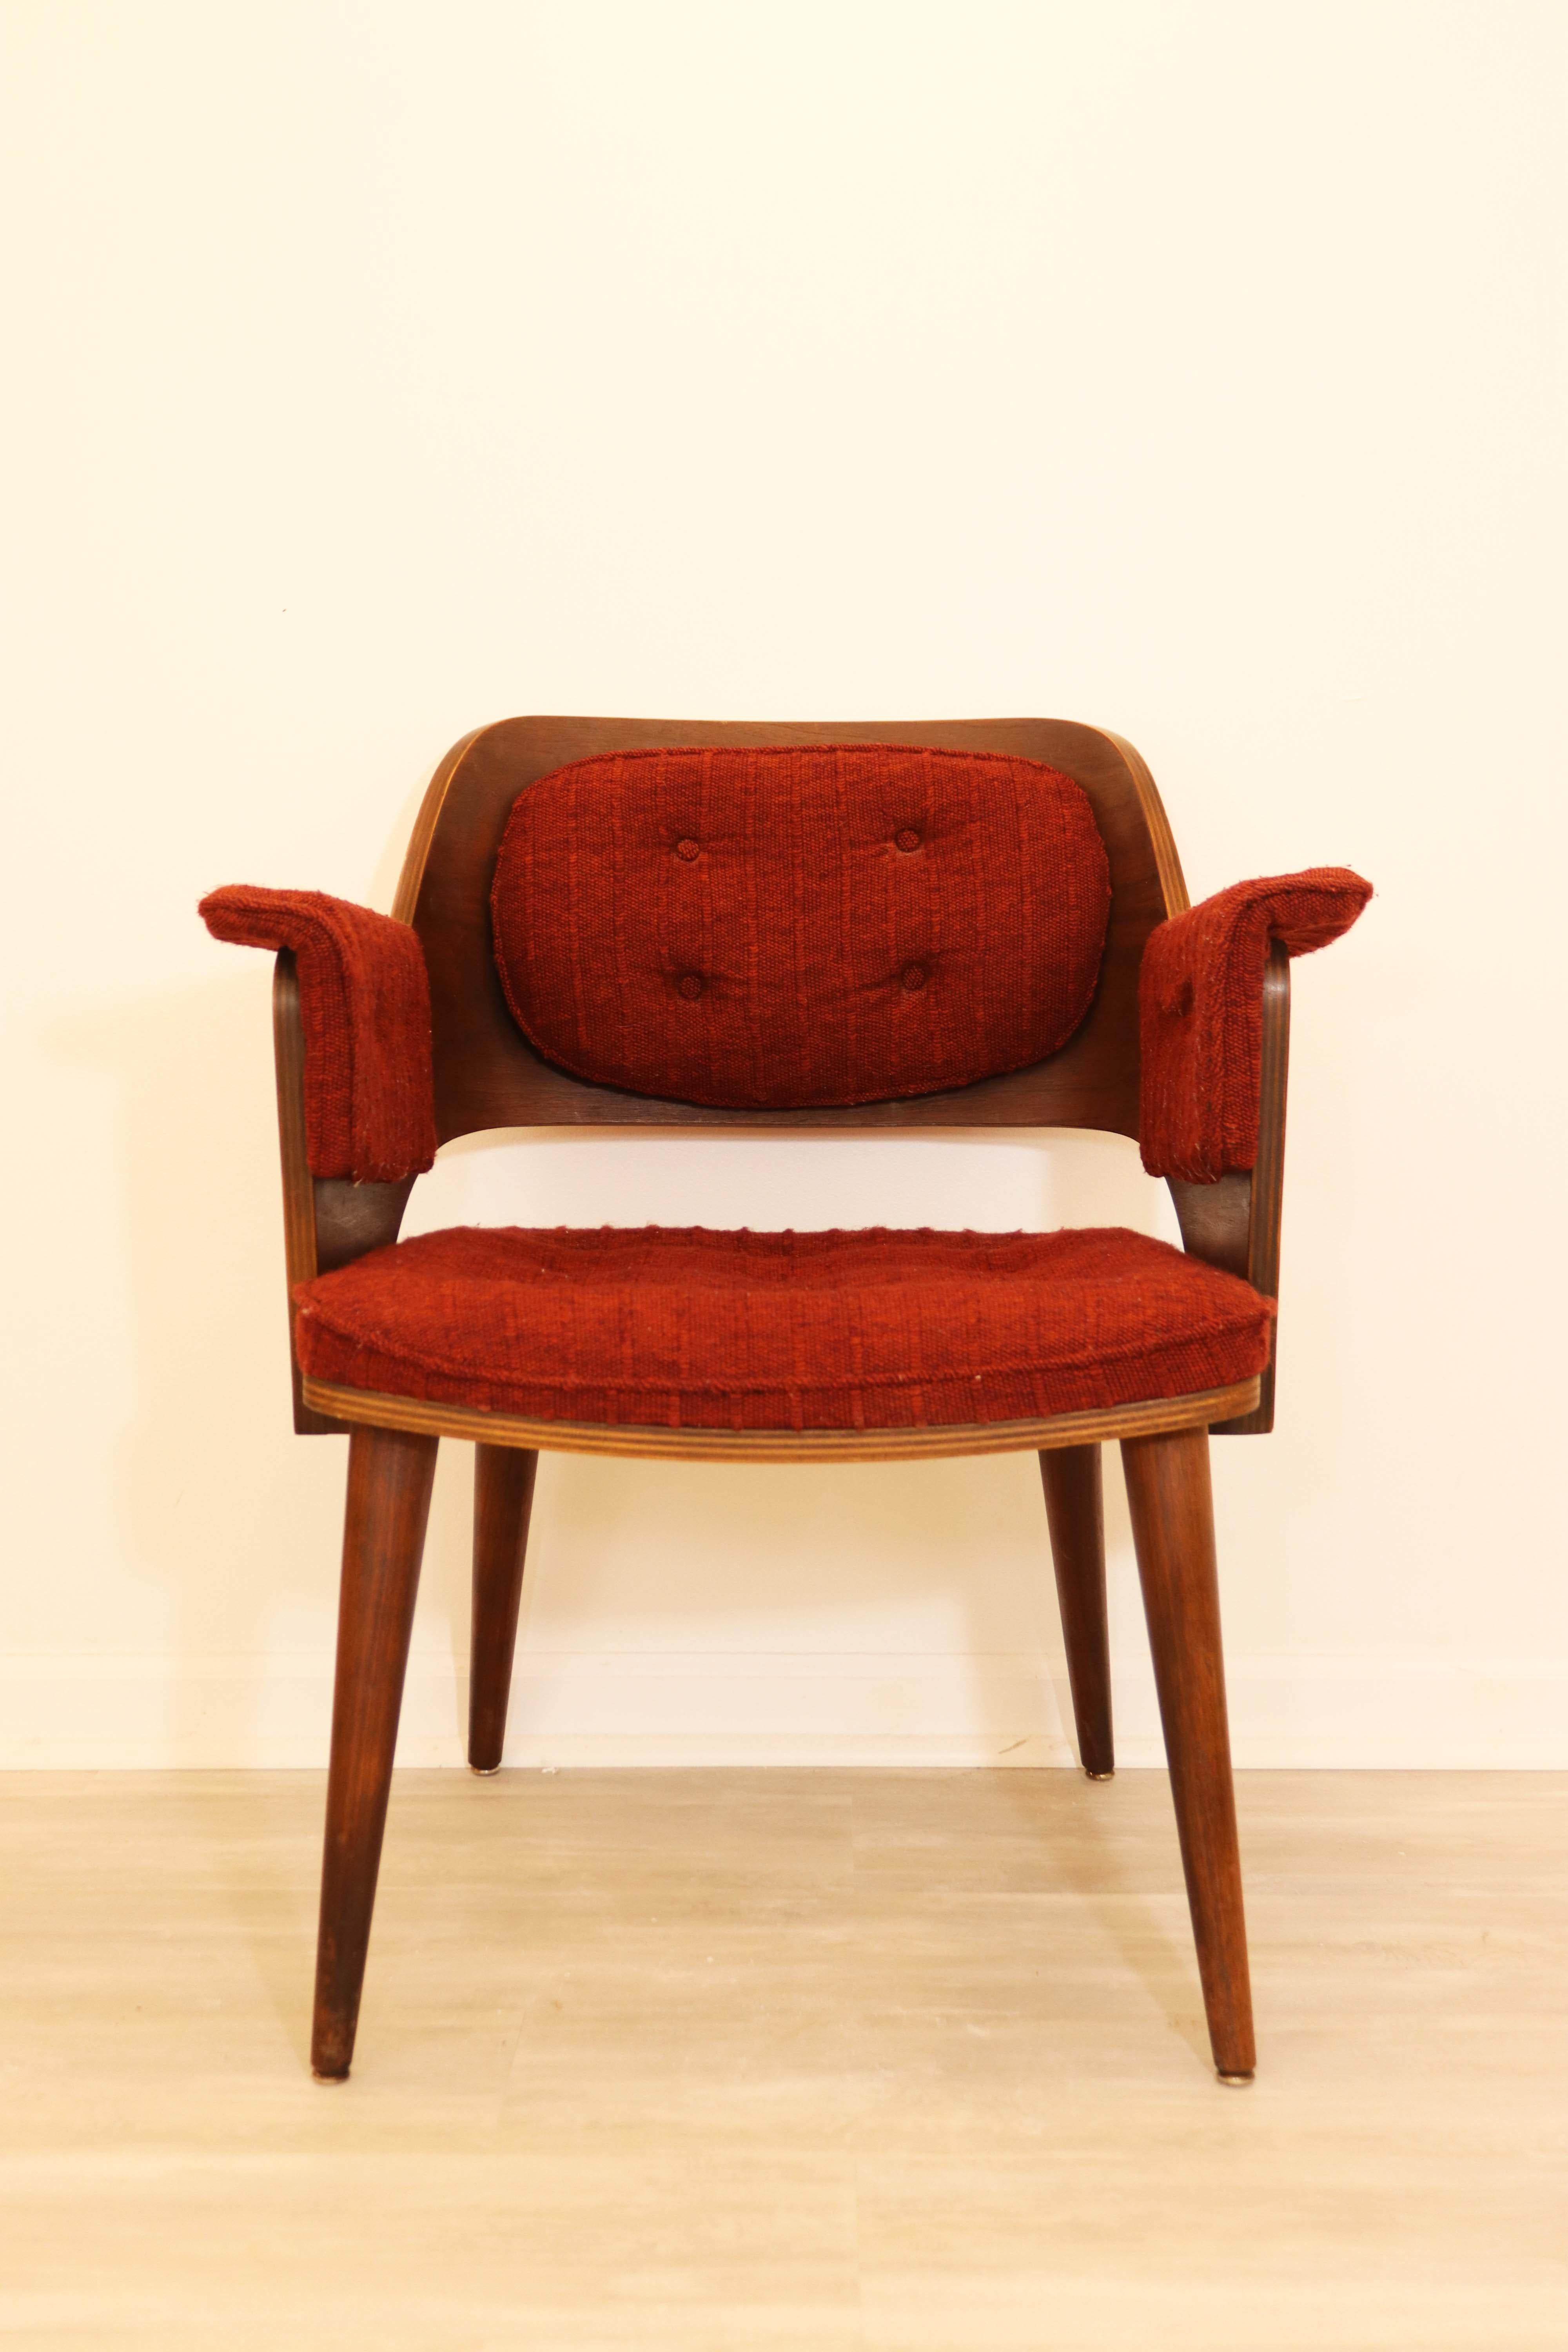 This pair of vintage bentwood armchairs are in original vintage condition with original burgundy tweed and button tufted upholstery. Structurally solid, this pair would work well with any Mid-Century Modern aesthetic.
 